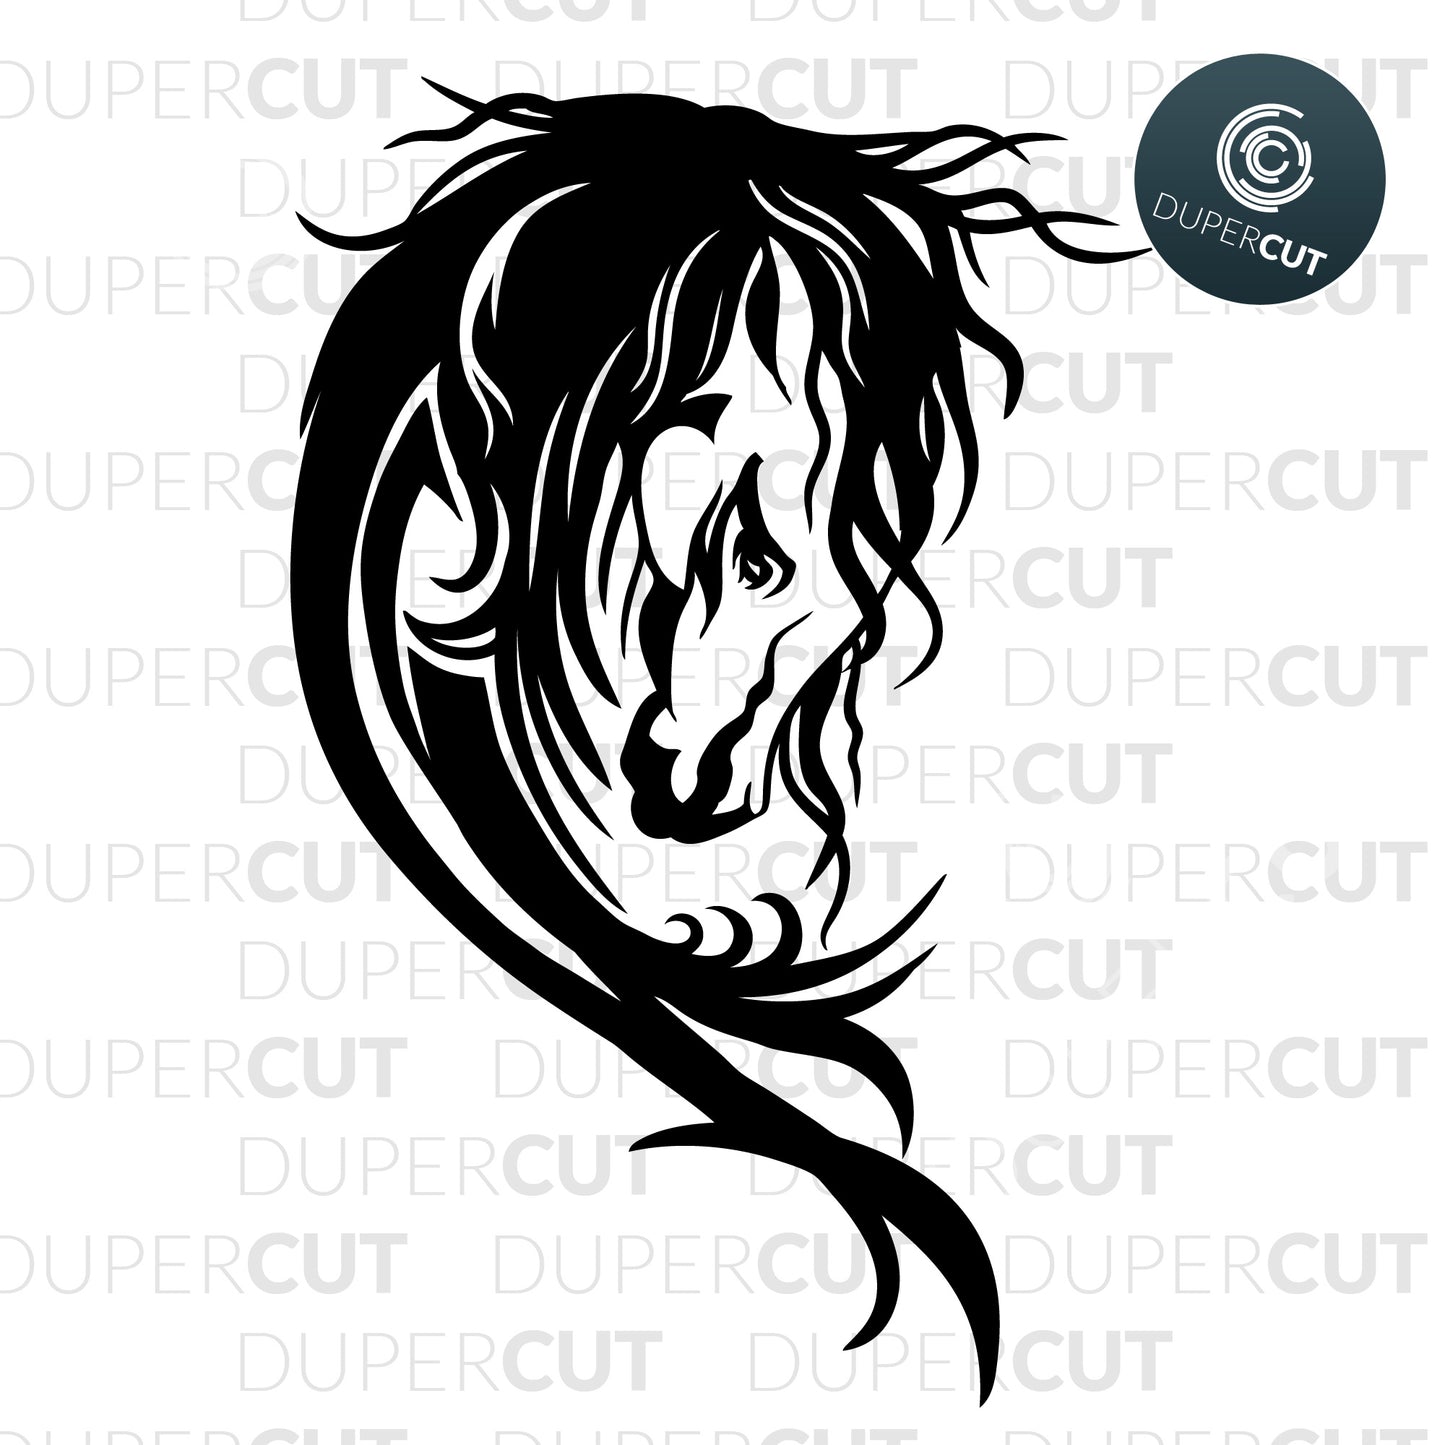 Decorative horse head, vector illustration. SVG PNG DXF files Paper cutting template for personal or commercial use. Vinyl template cutting files for Cricut, Glowforge, Silhouette, CNC